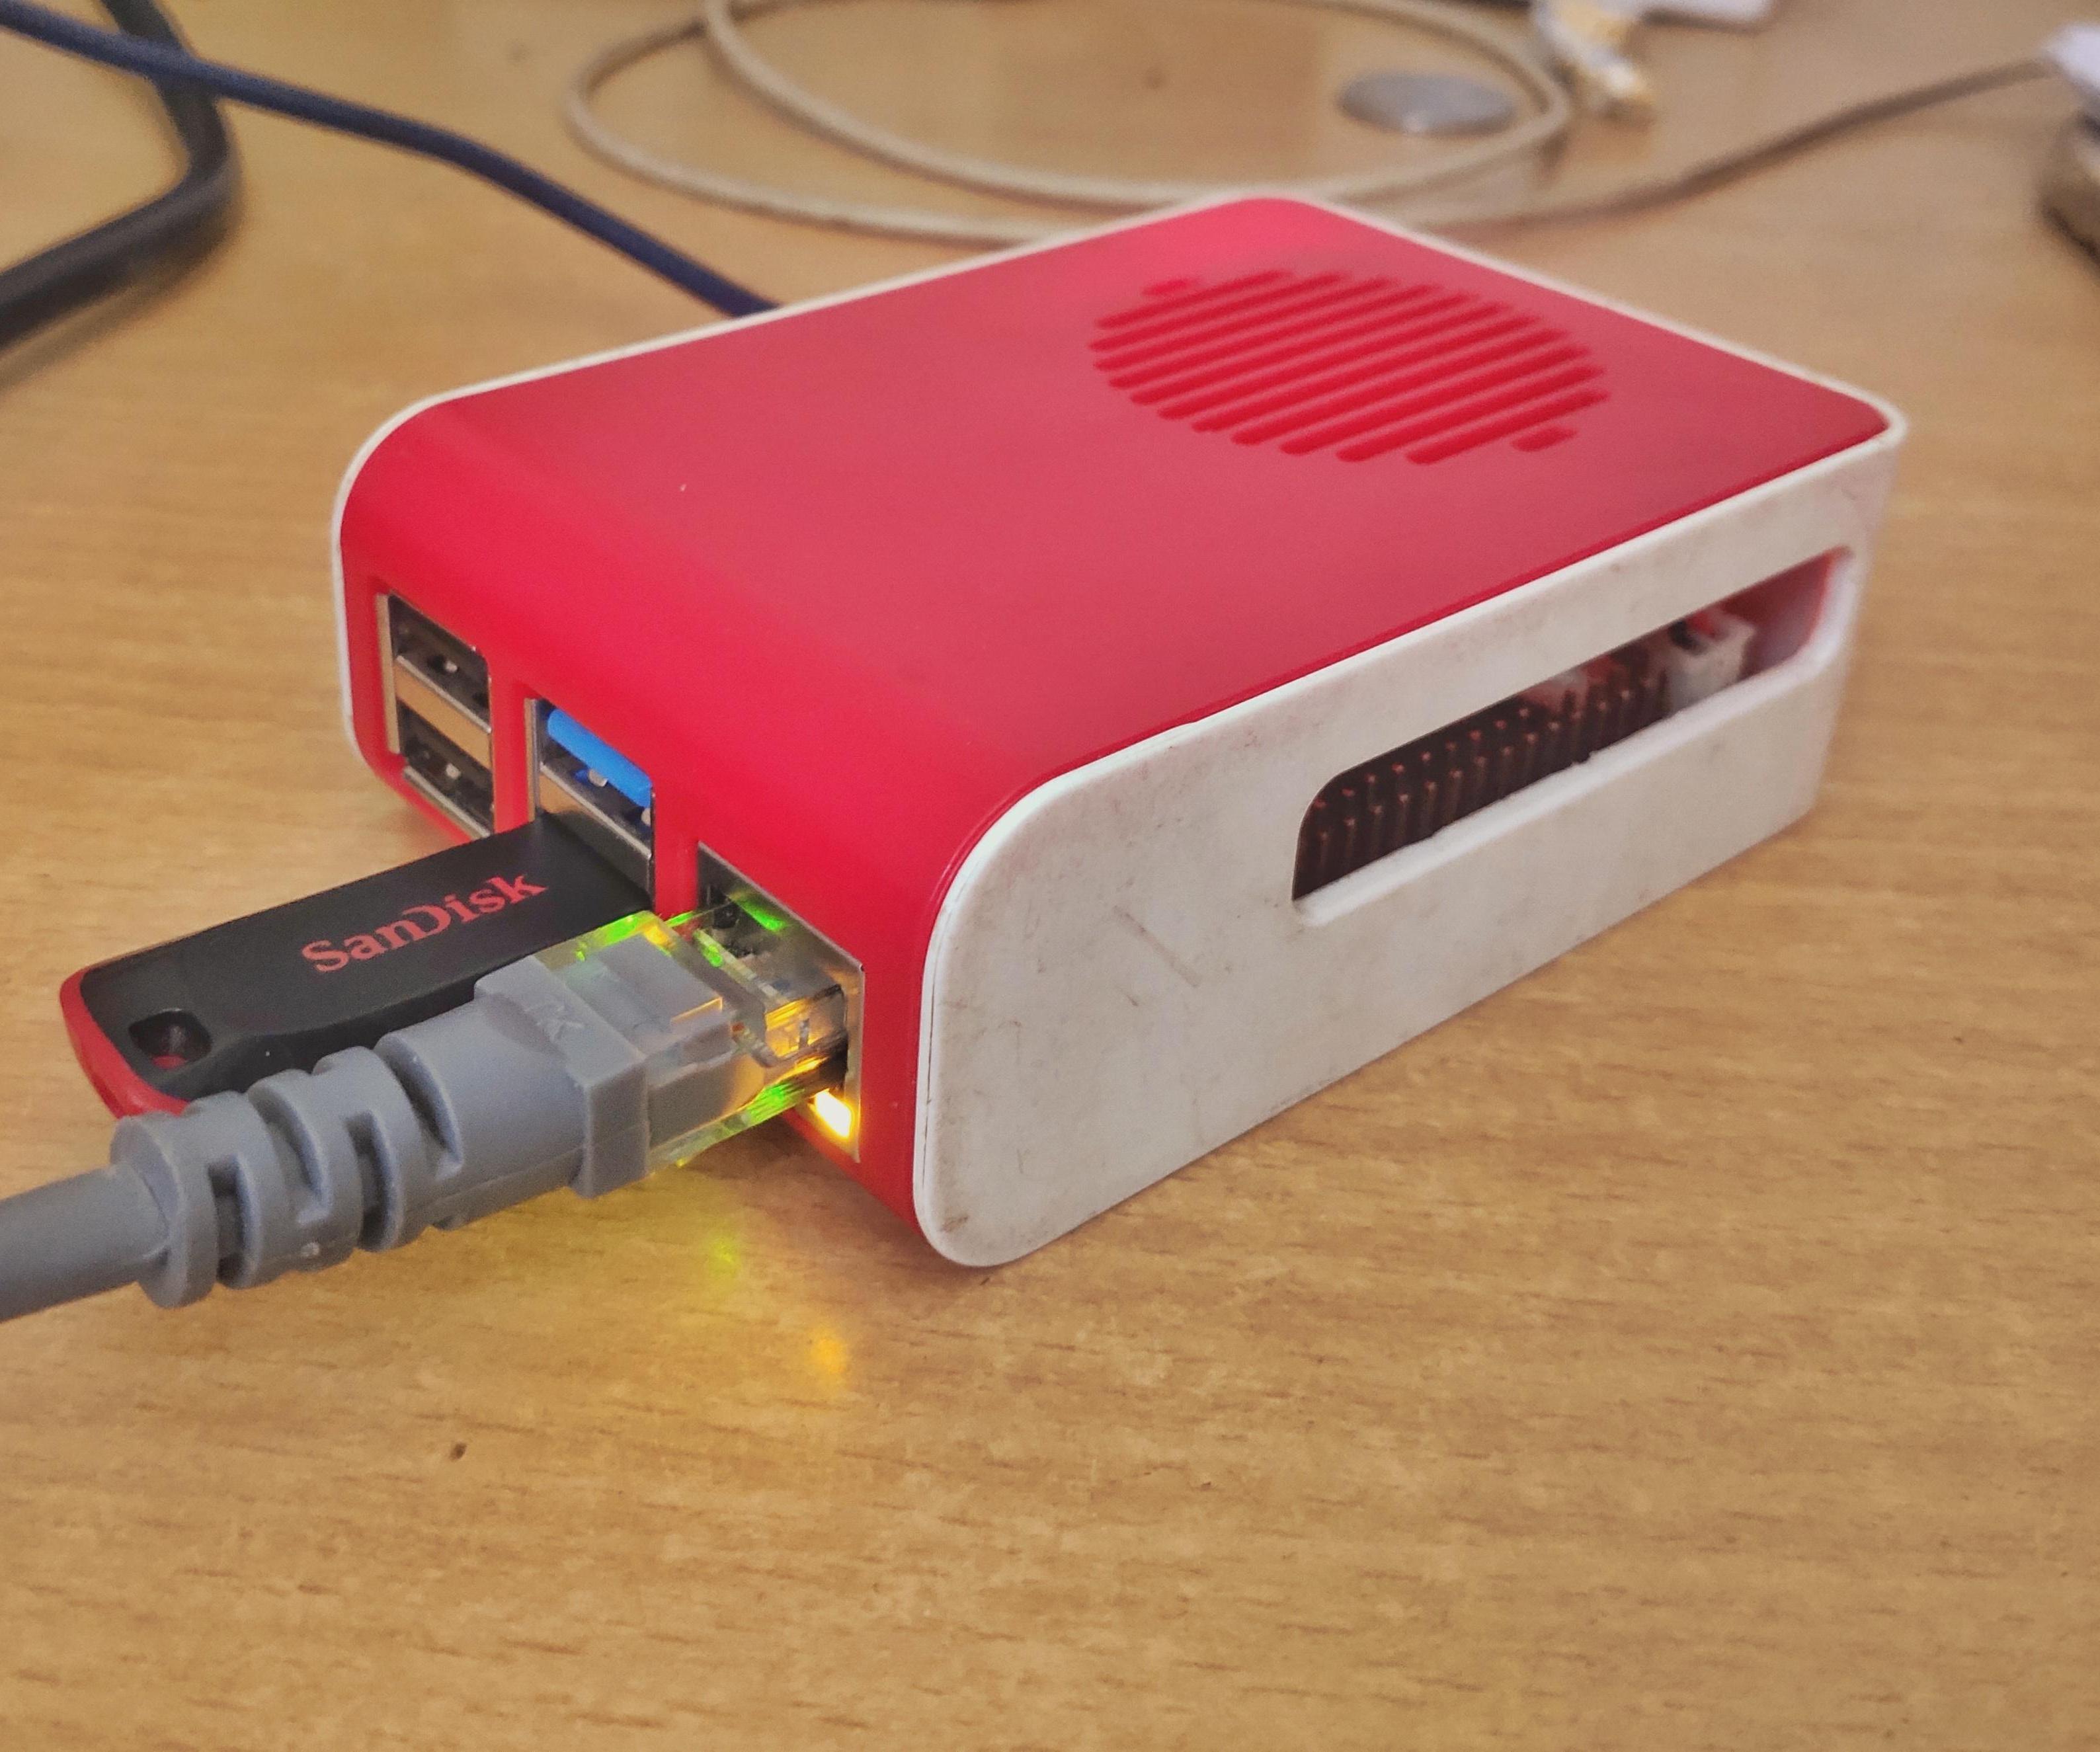 NAS Using Raspberry Pi for Your Home Network